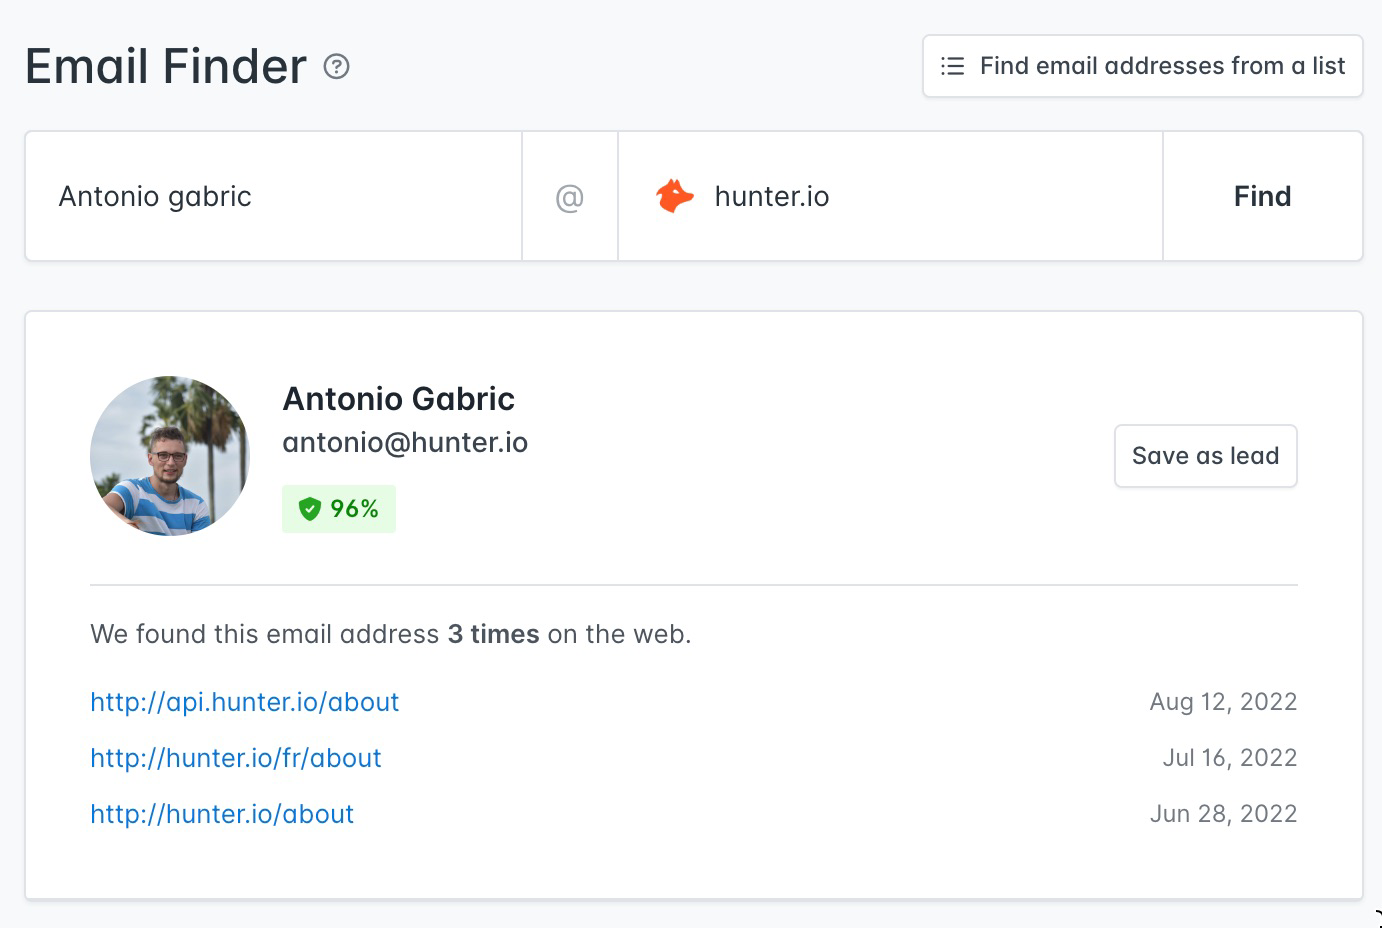 a screenshot of an email finder page for antonio gabric